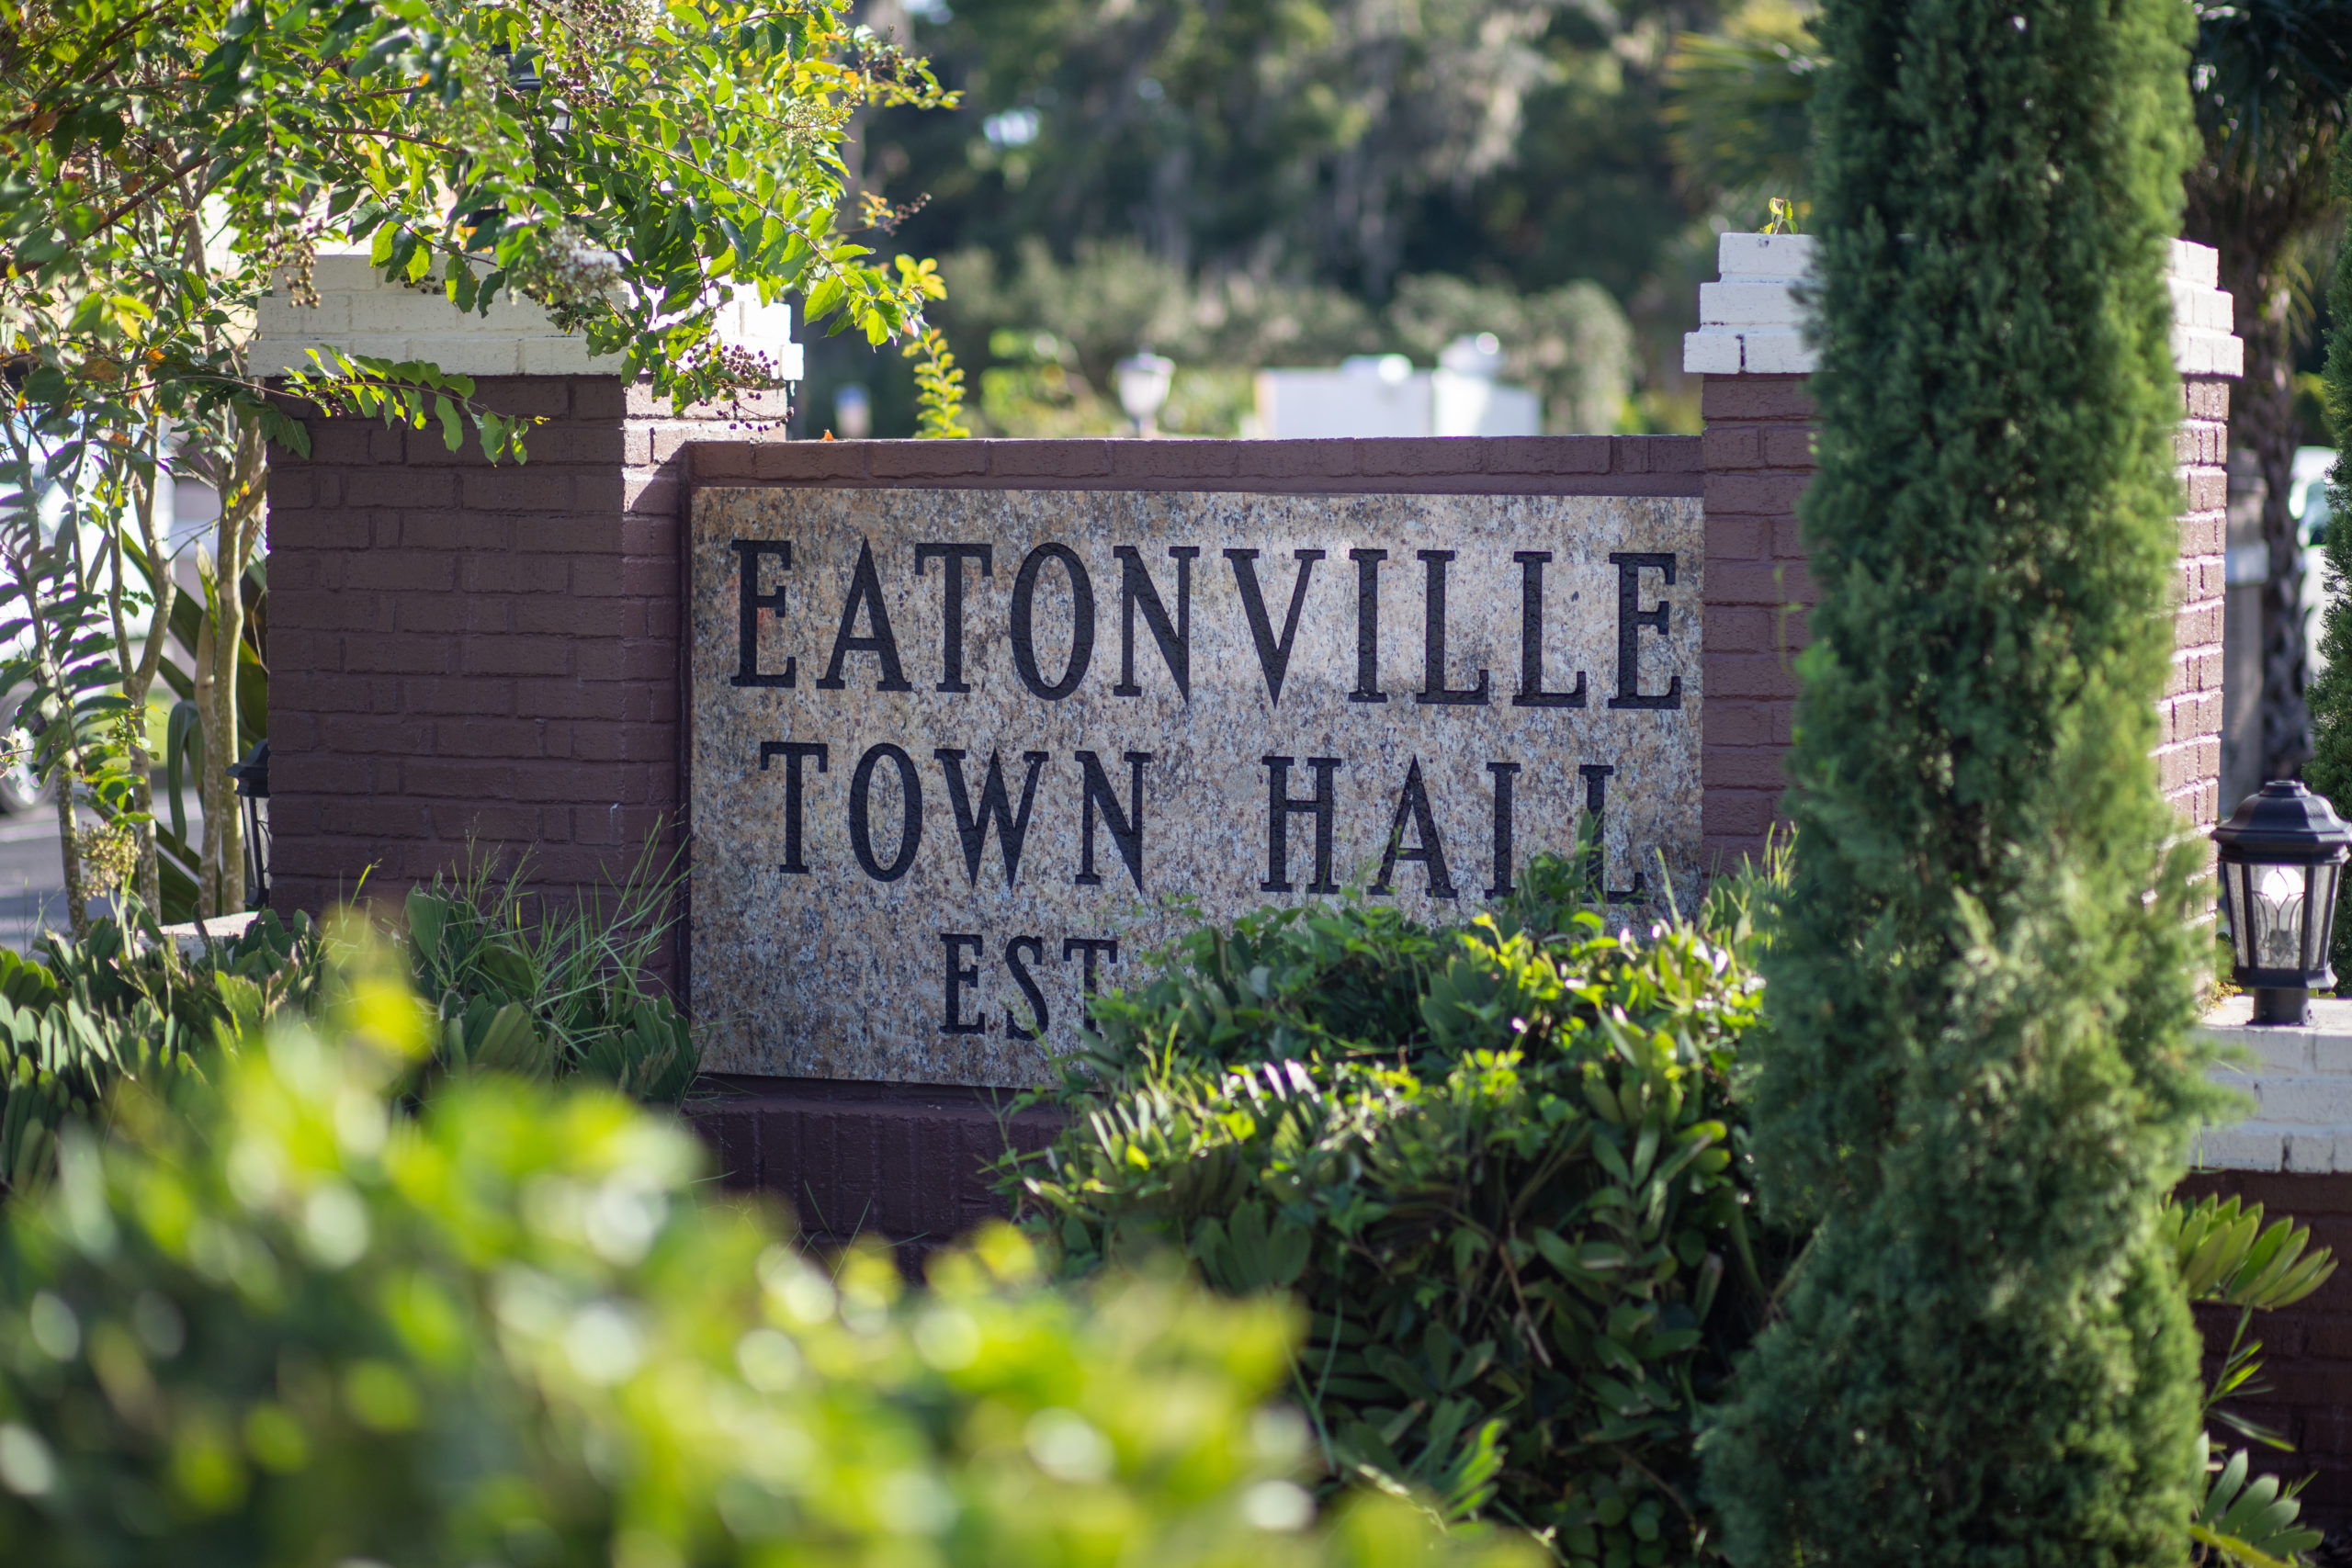 Eatonville Town Hall sign